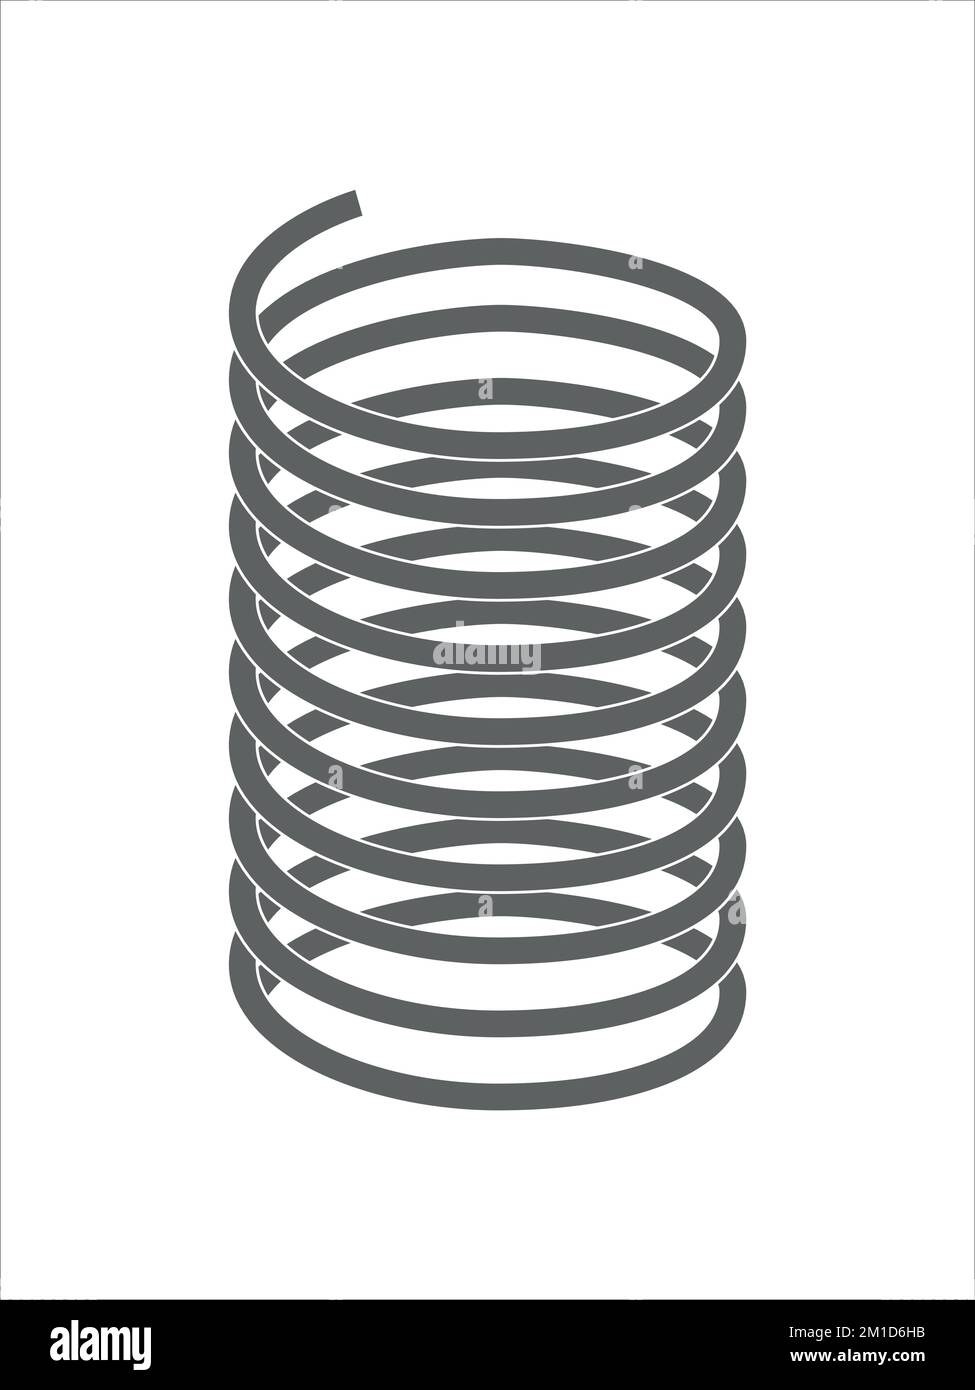 Metal straight Spring. Compressed coil, spirals. Repair spare parts. Vector illustration of springs isolated on white background. Stock Vector